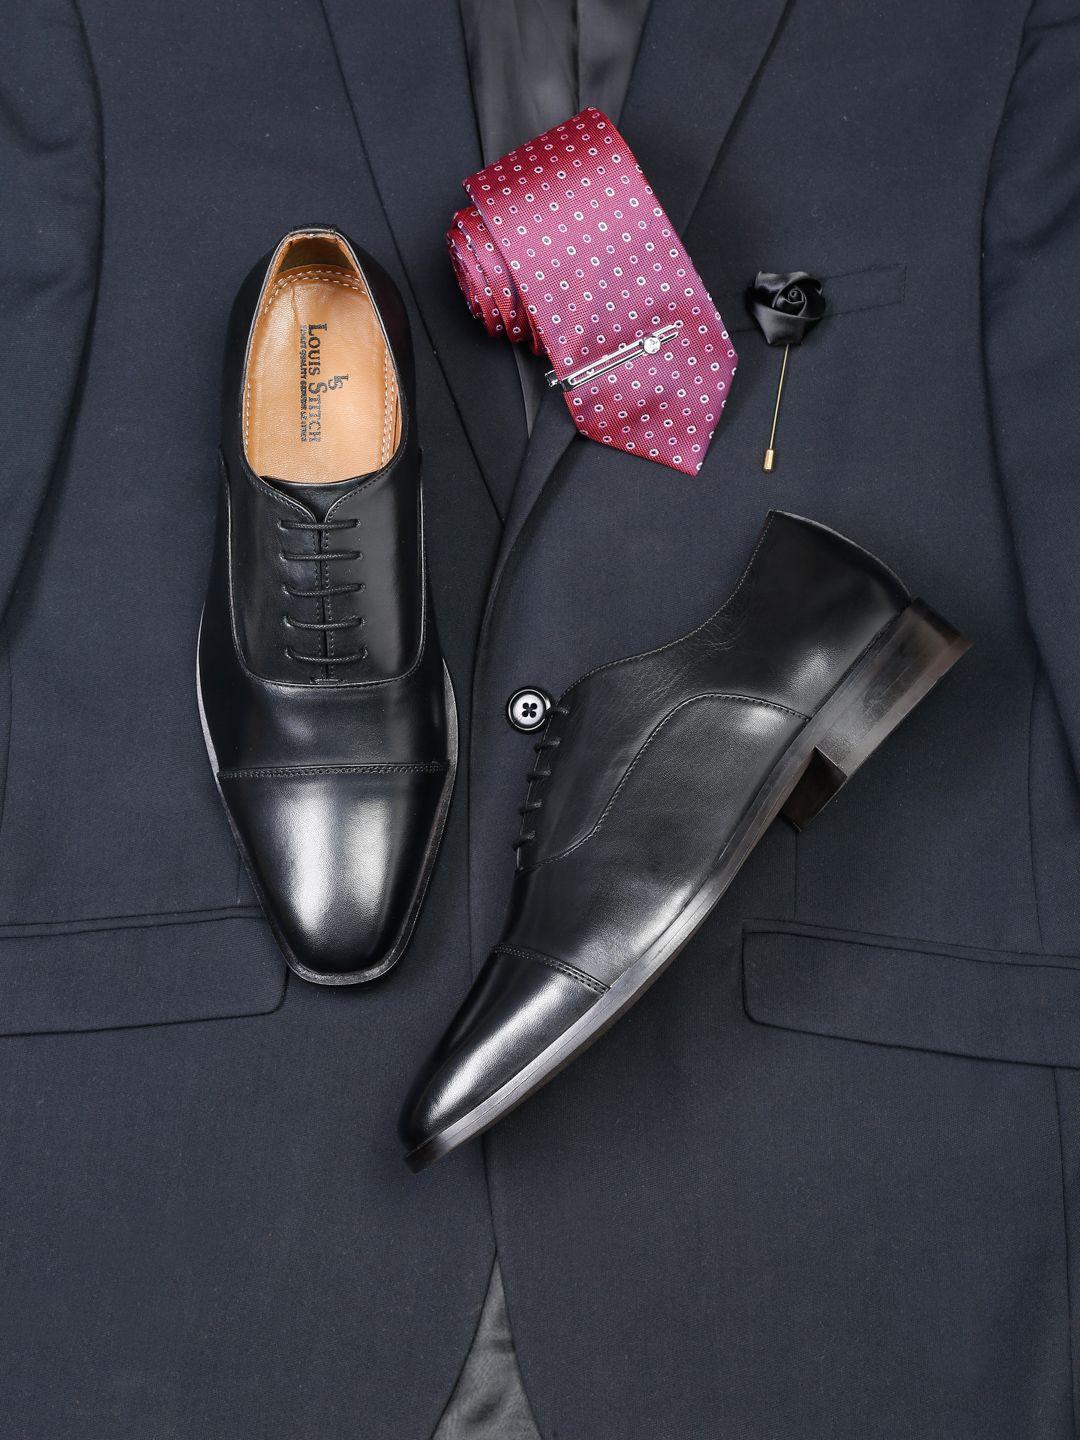 louis-stitch-men-black-solid-genuine-italian-leather-formal-oxfords-shoes